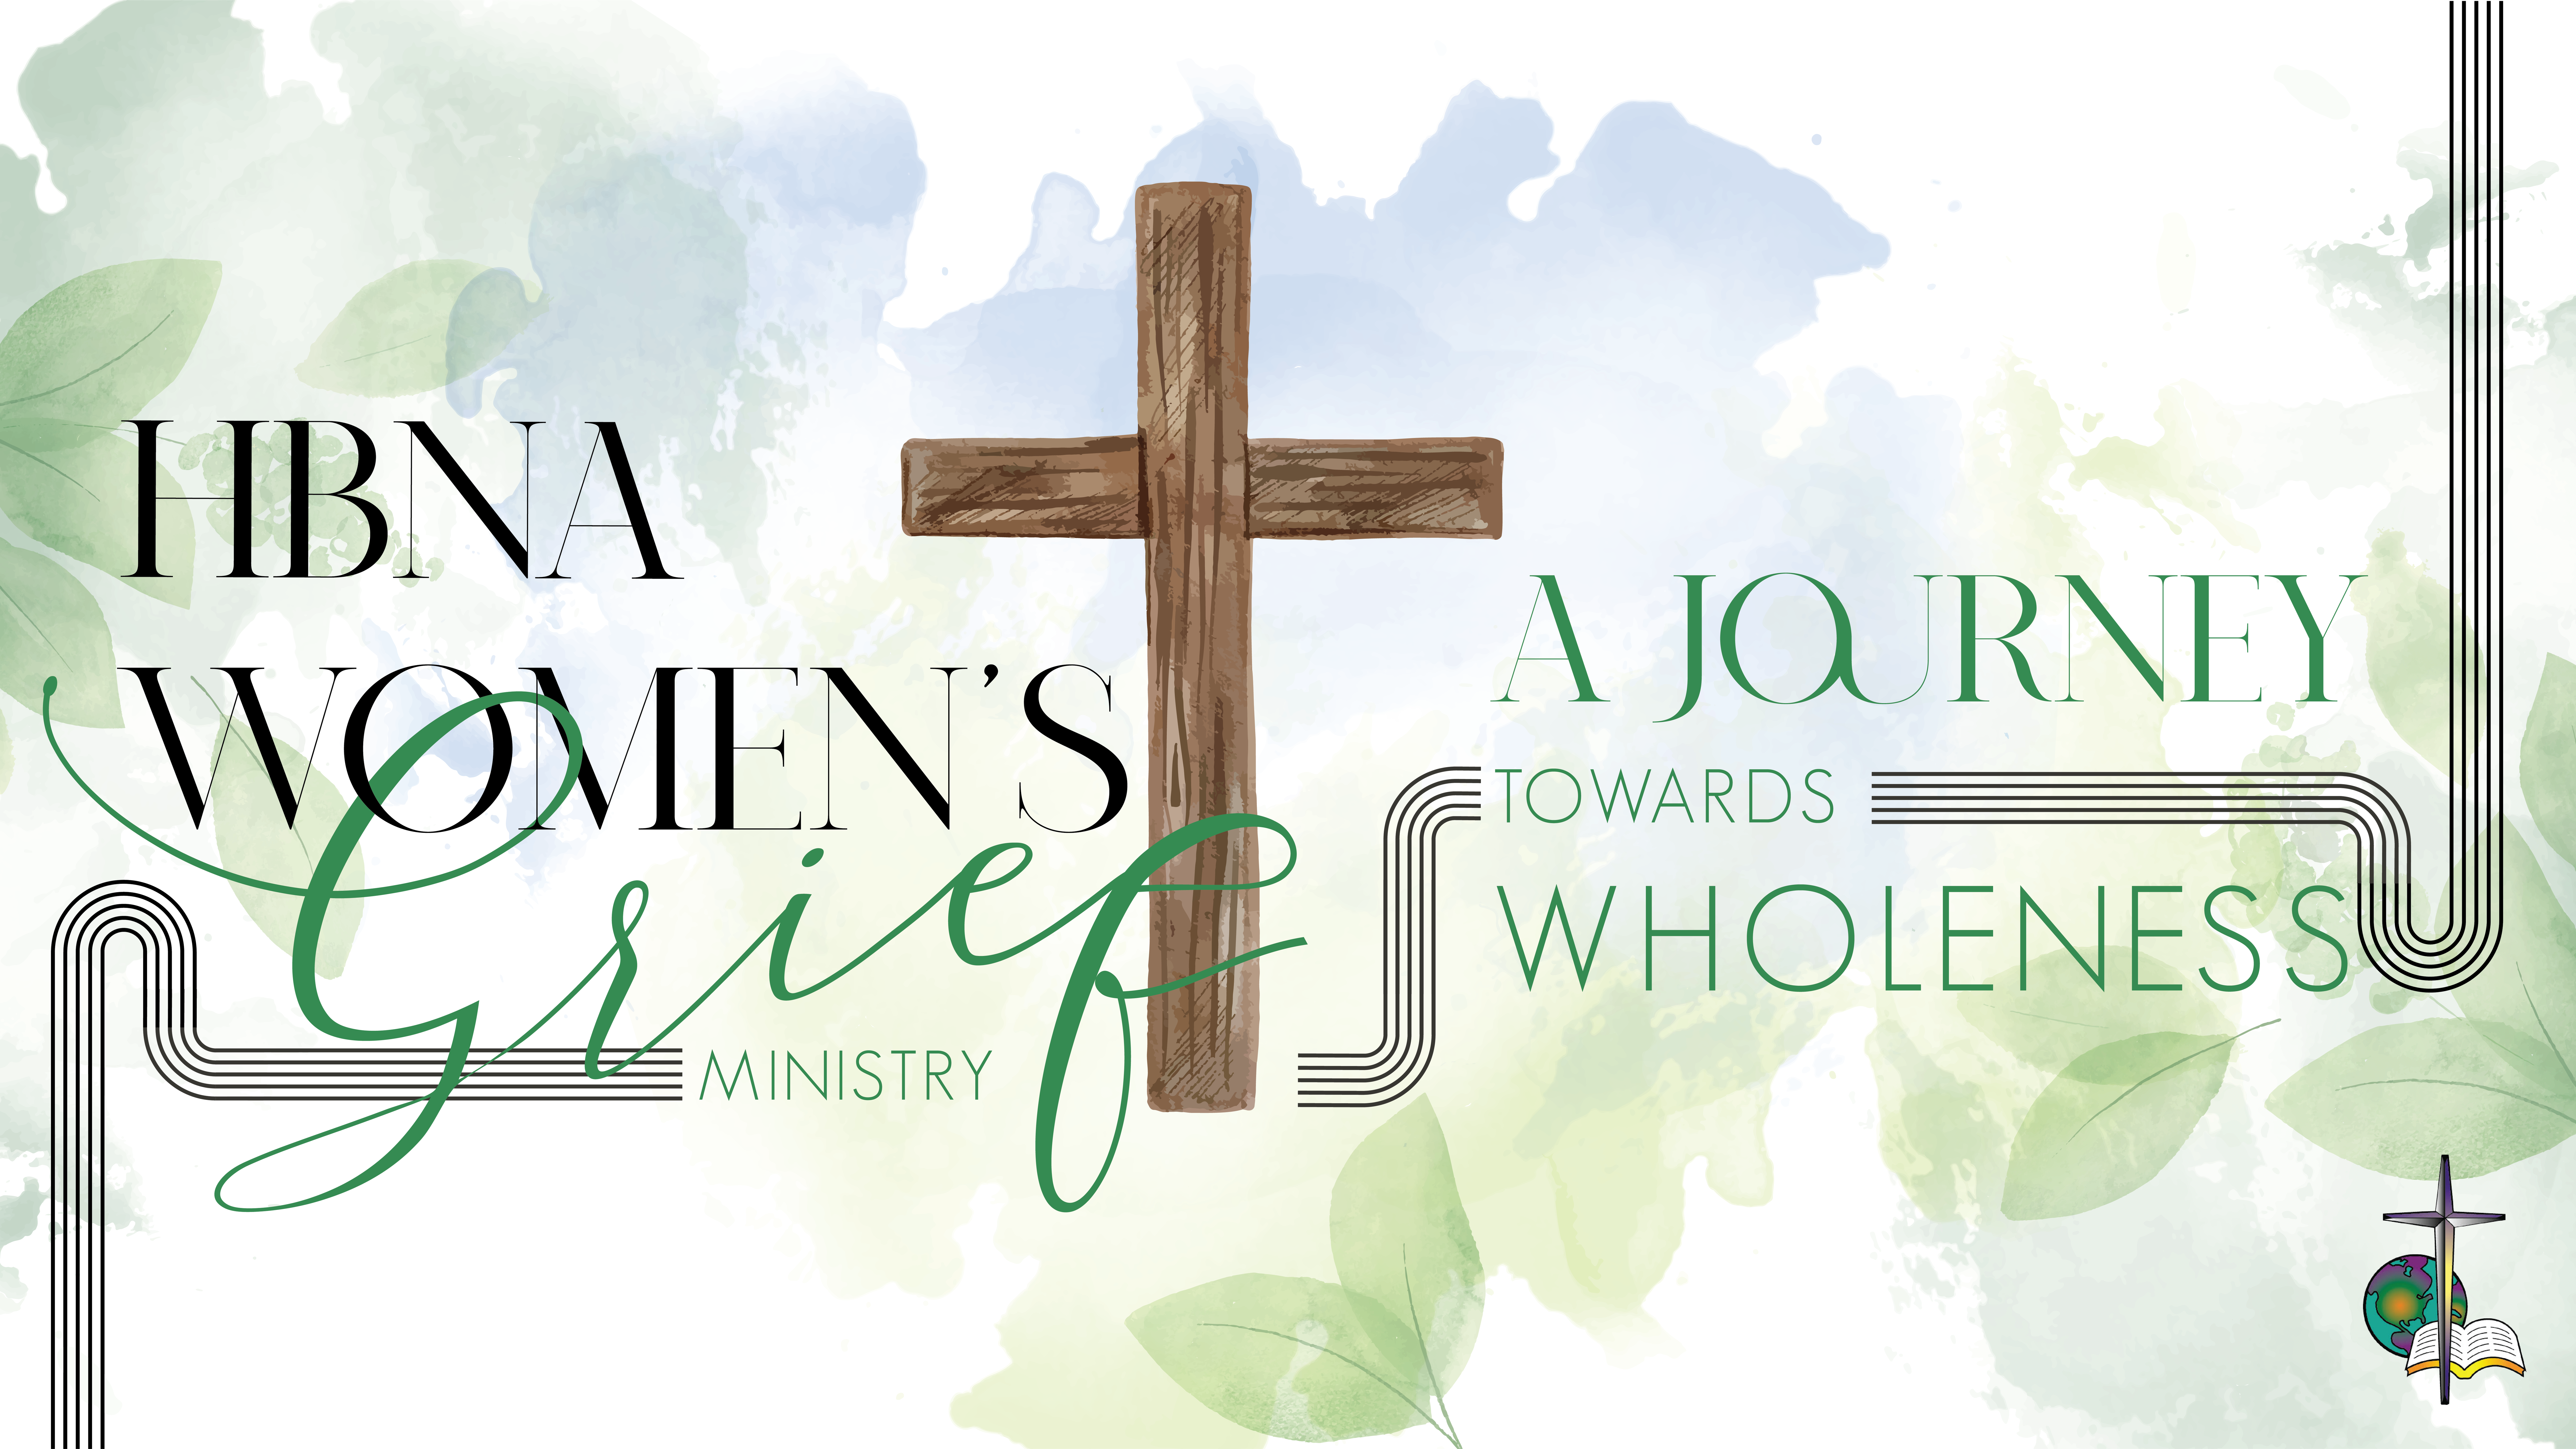 Women’s Grief Ministry